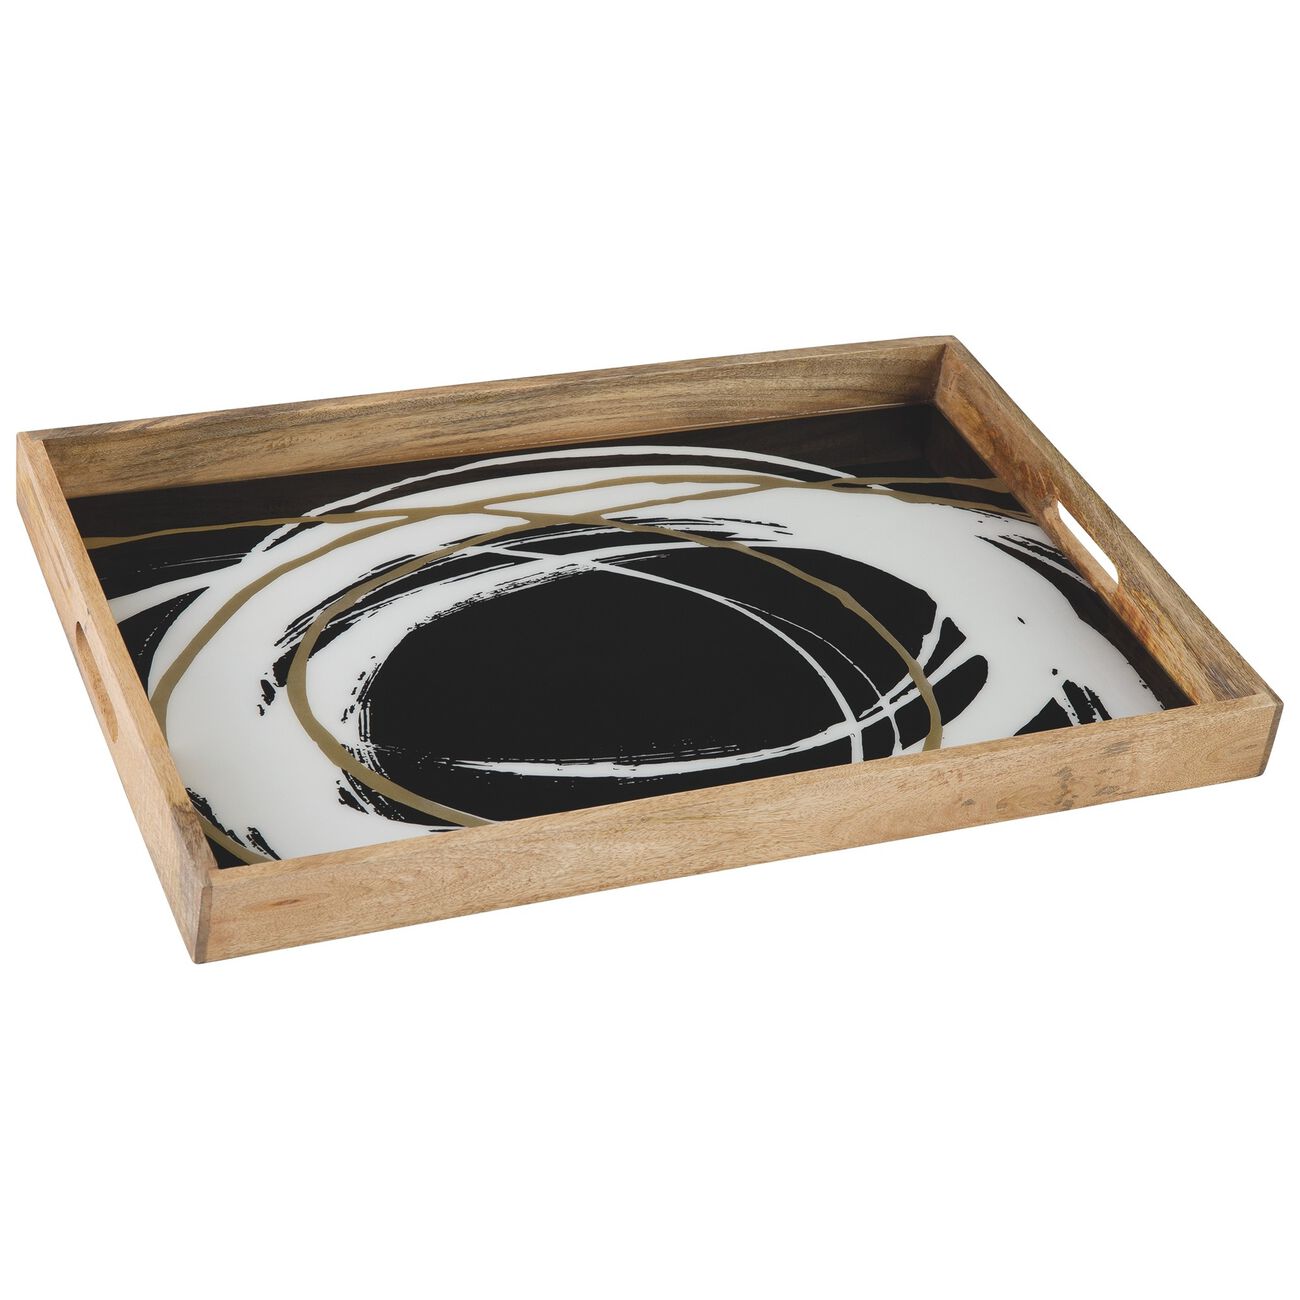 Rectangular Tray with  Wooden Frame and Enamel Top, Black and White